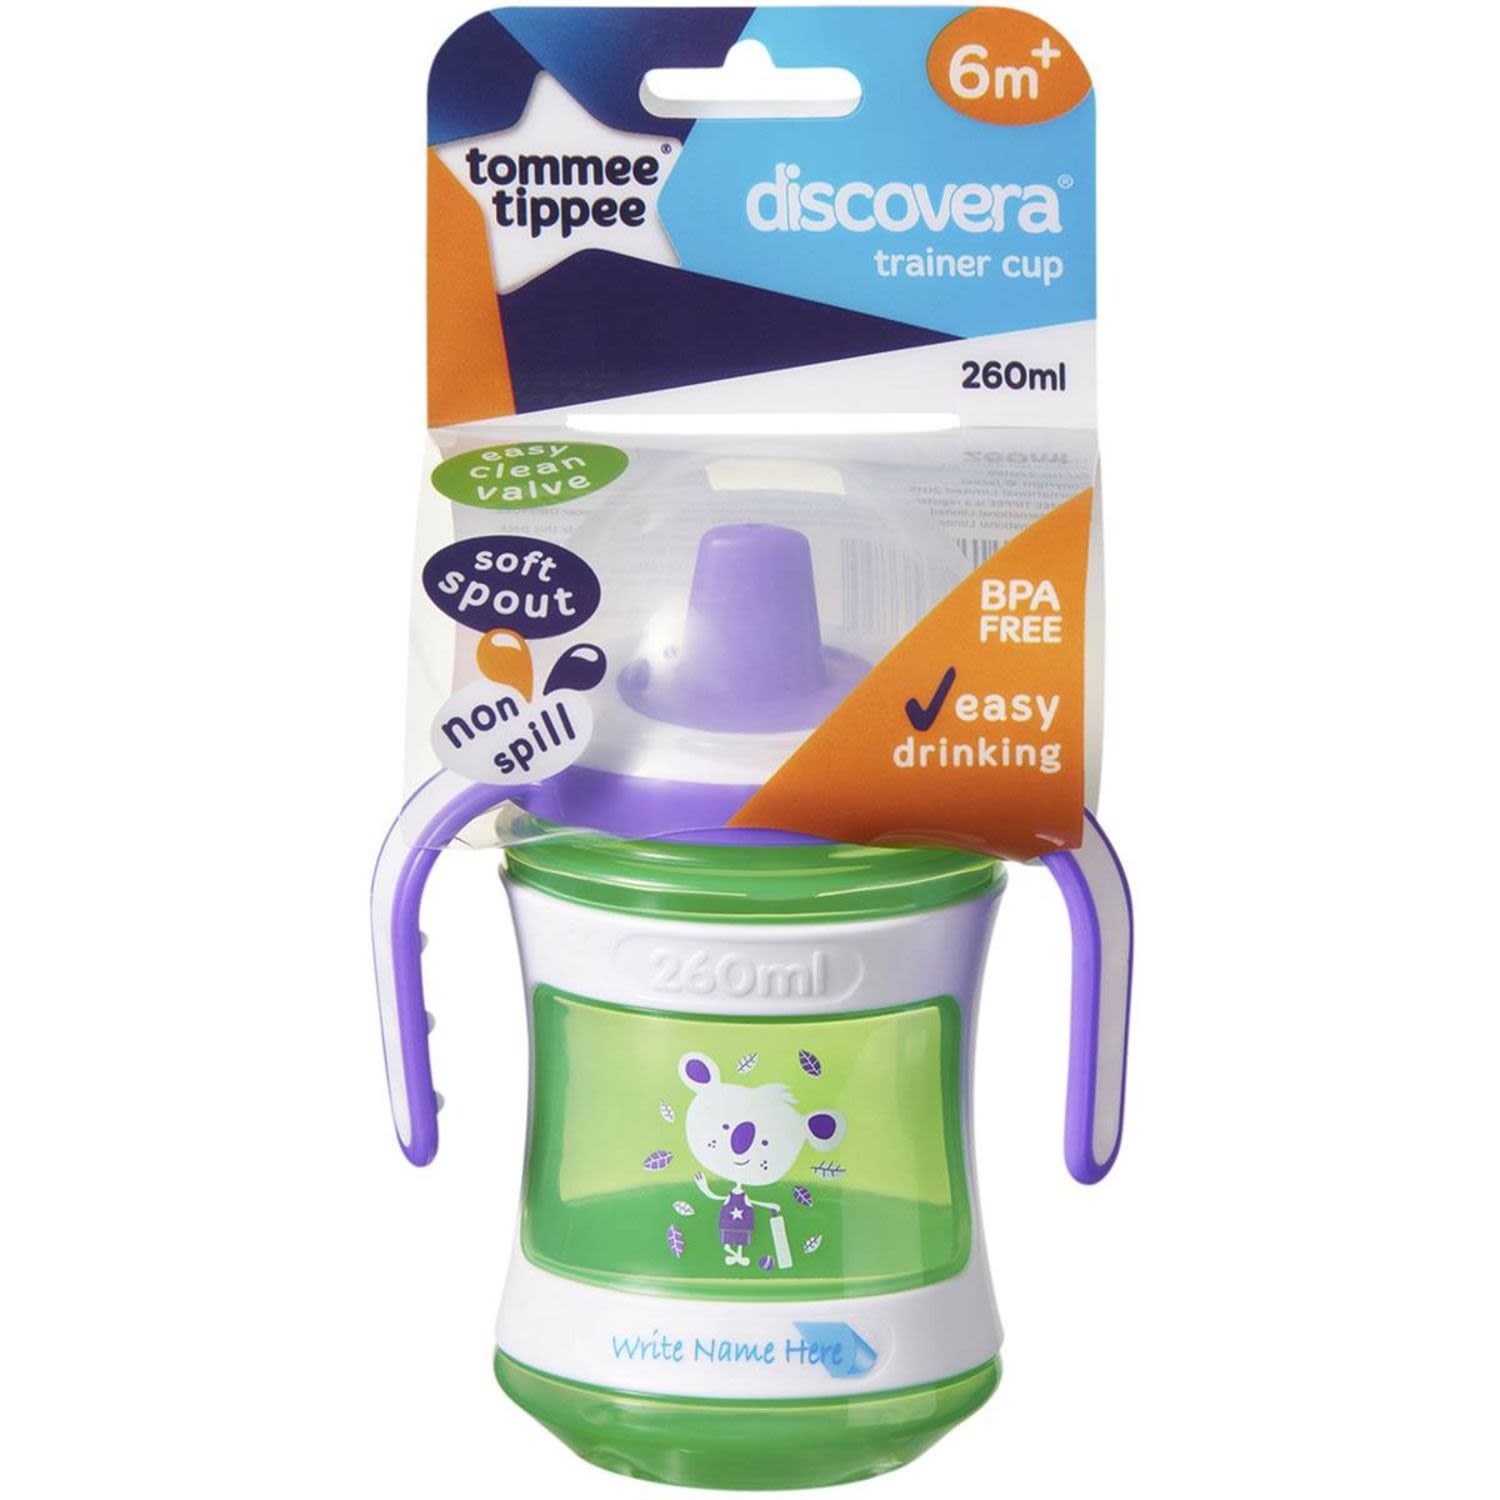 Tommee Tippee Discovera Trainer Cup 260ml, 1 Each